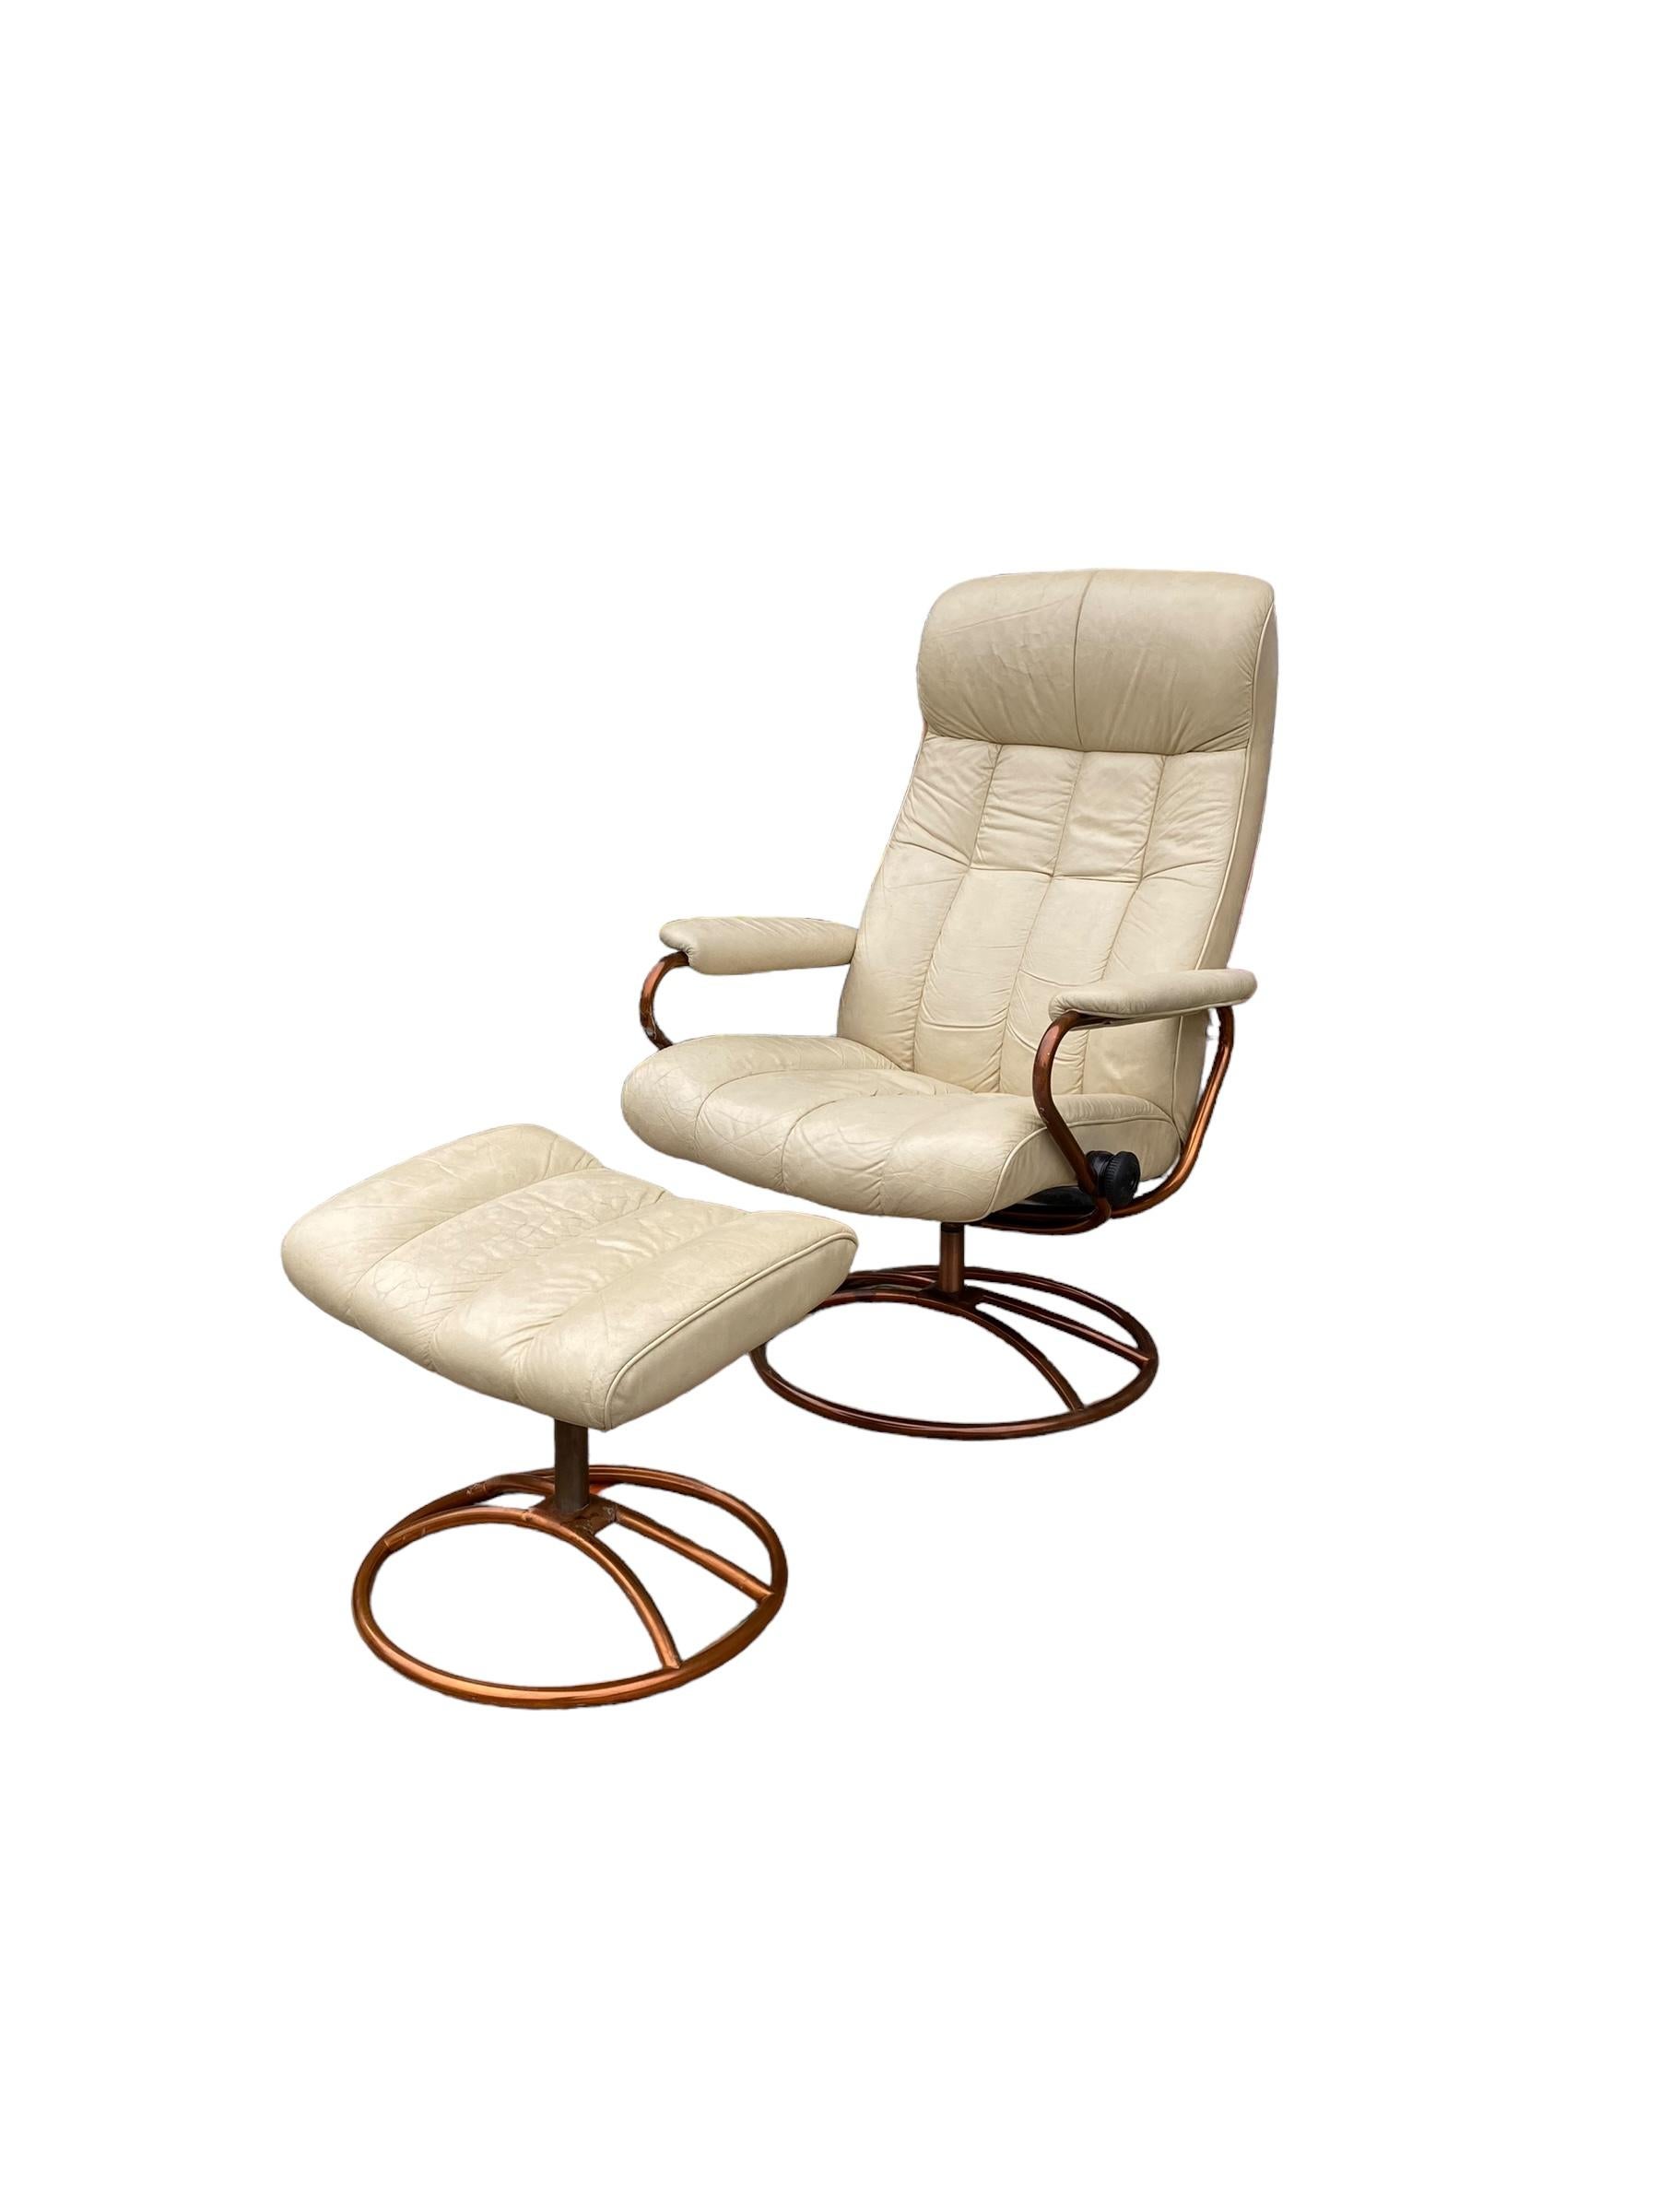 Post Modern Stressless Lounge Chair and Ottoman with copper frame For Sale 1